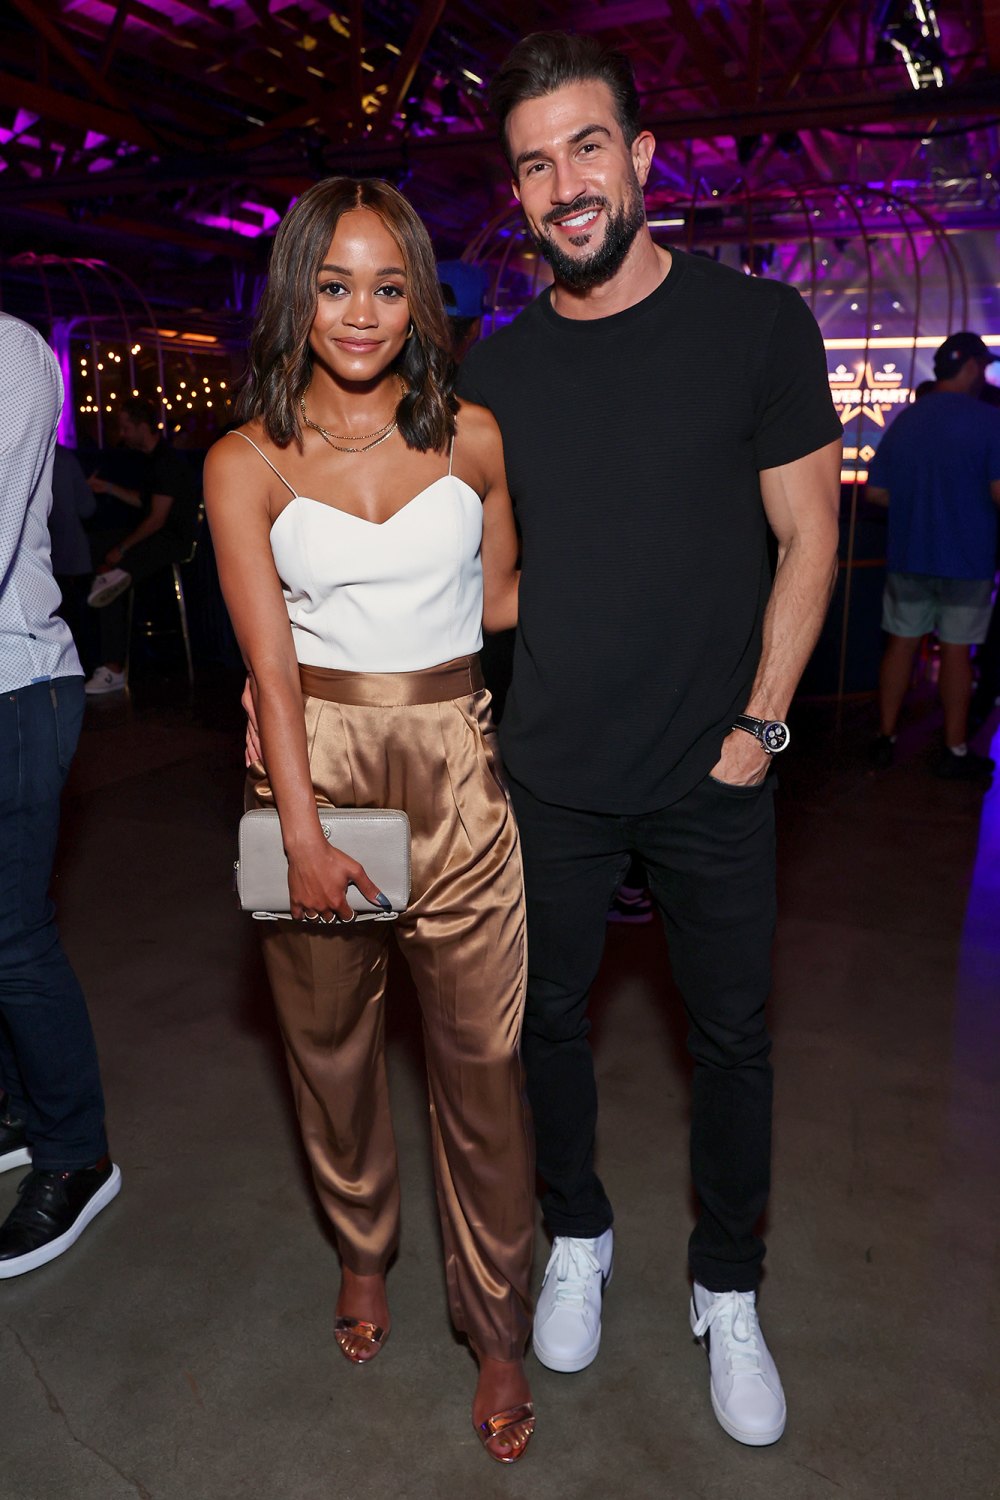 Rachel Lindsay Feels 'Completely Separated' From Bachelor Nation Amid Bryan Abasolo Divorce